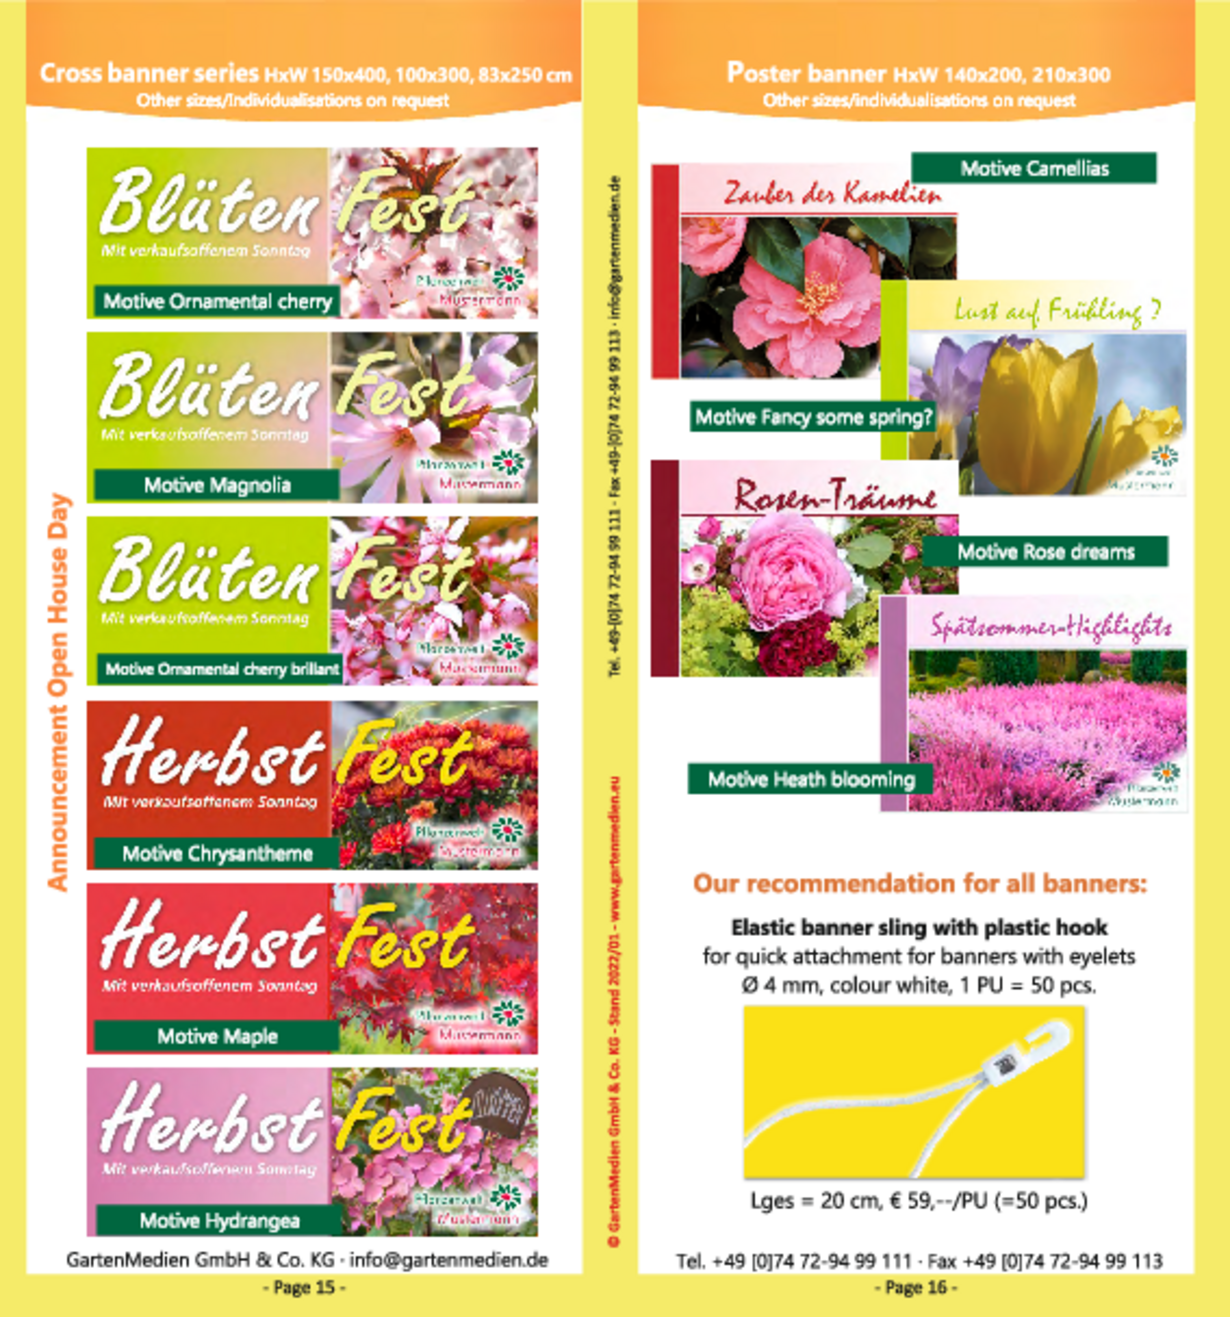 Landscape banner page 15 and 16